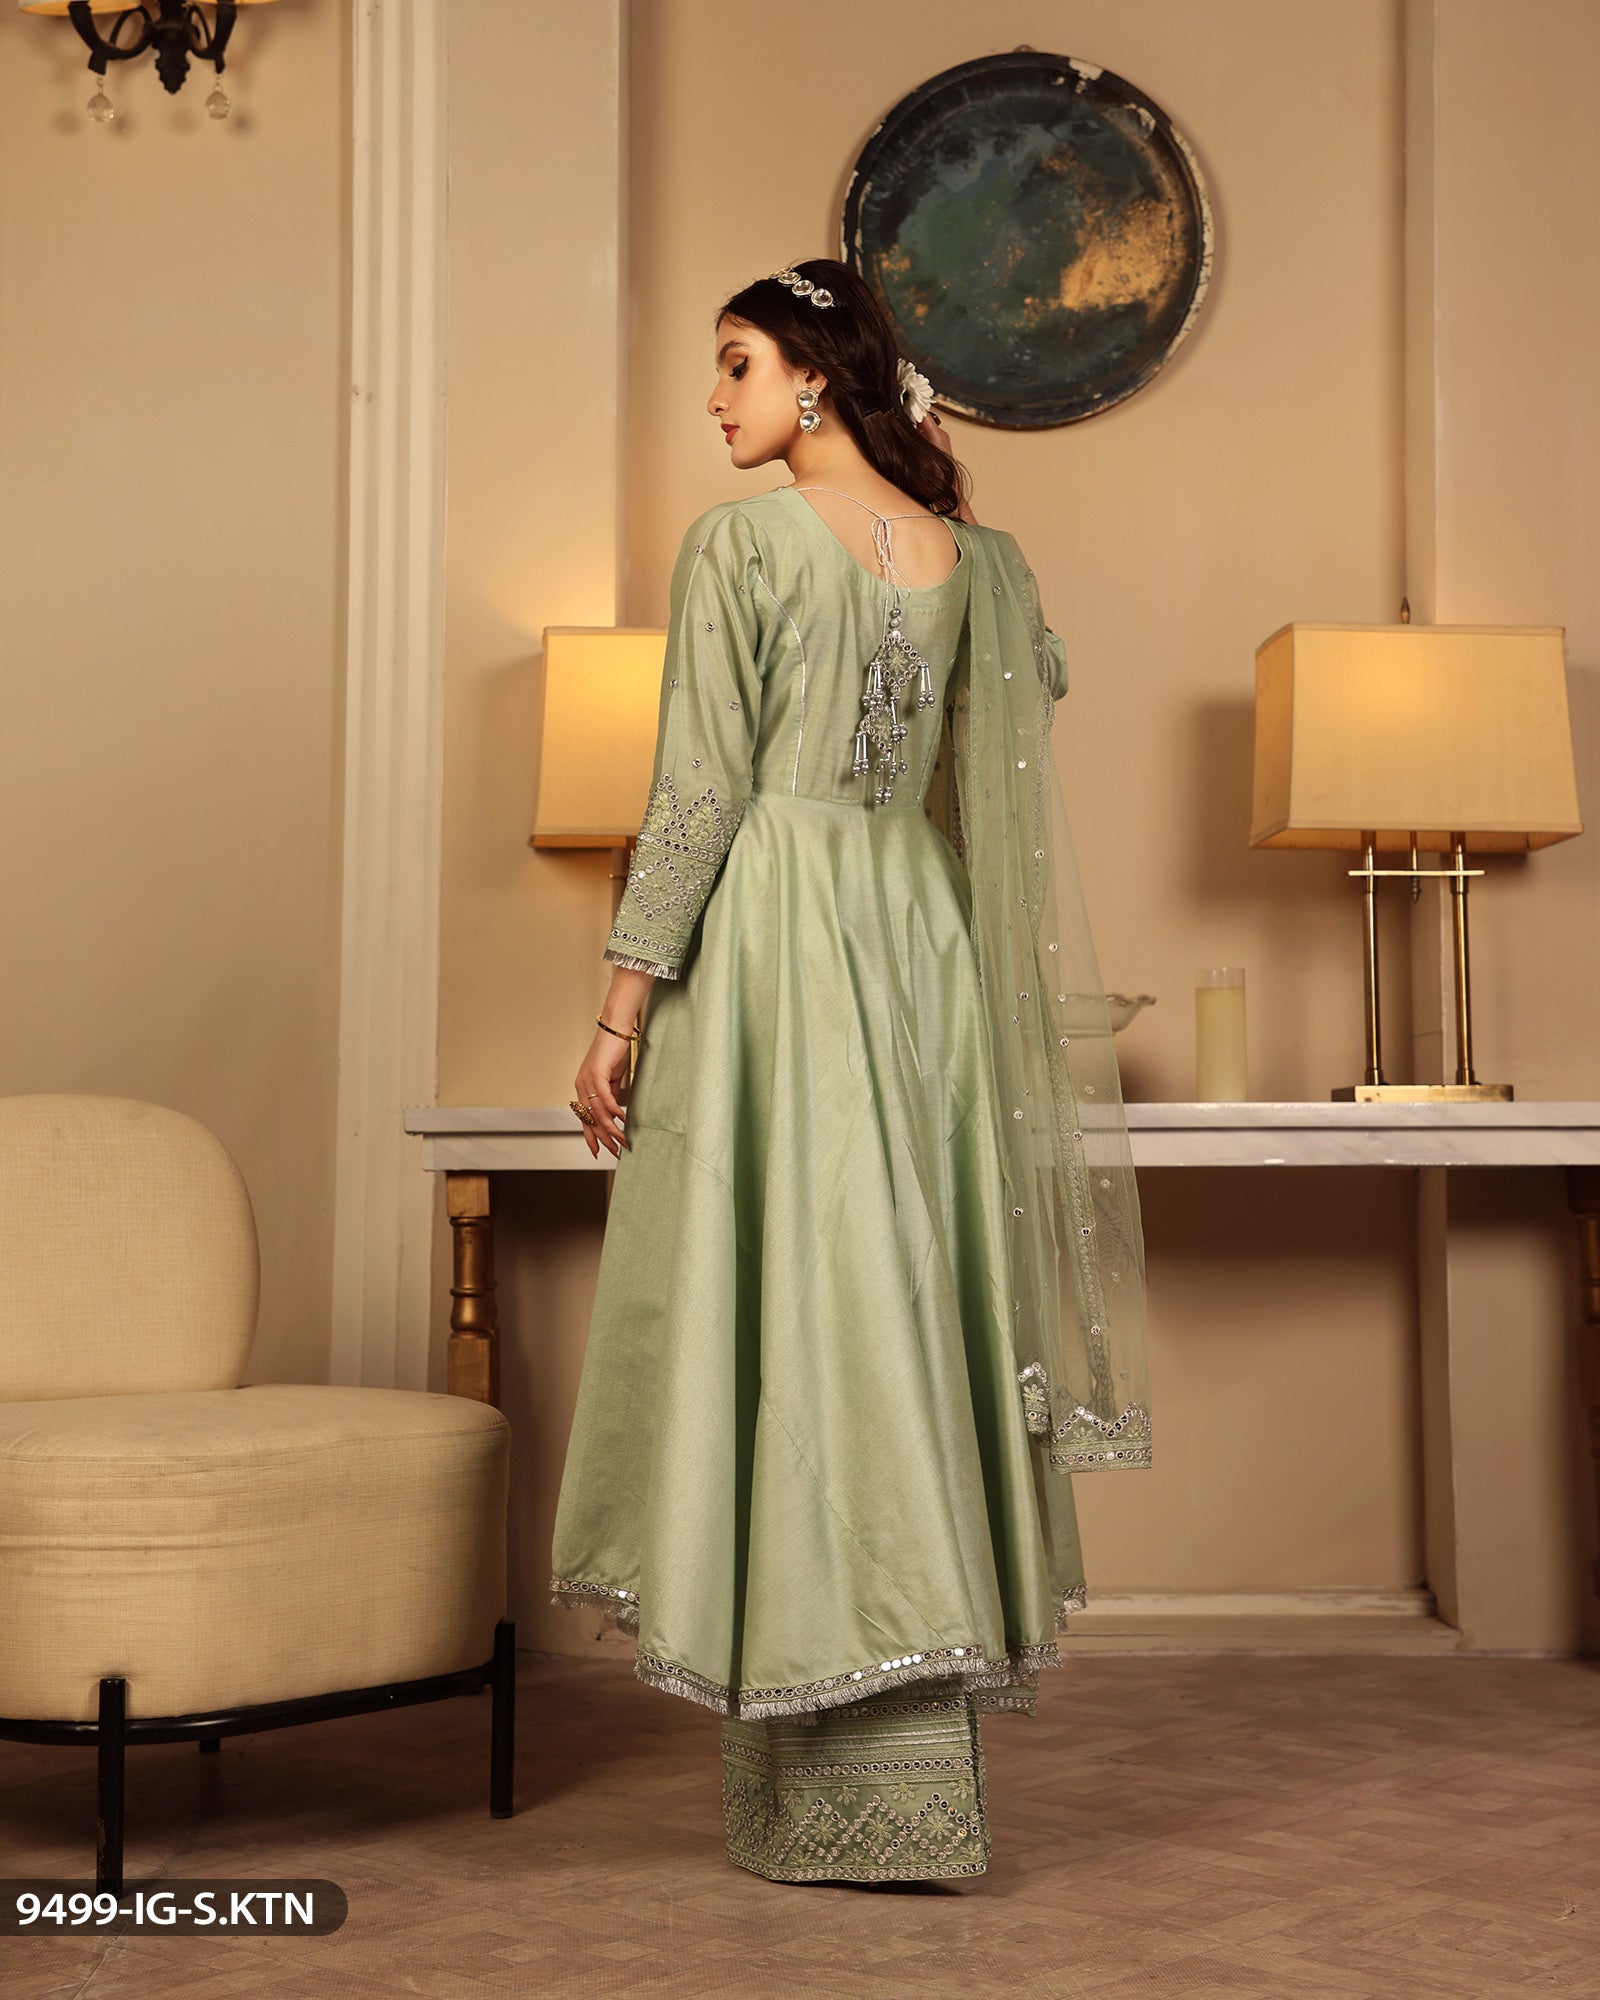 Formal Embroidered Frock